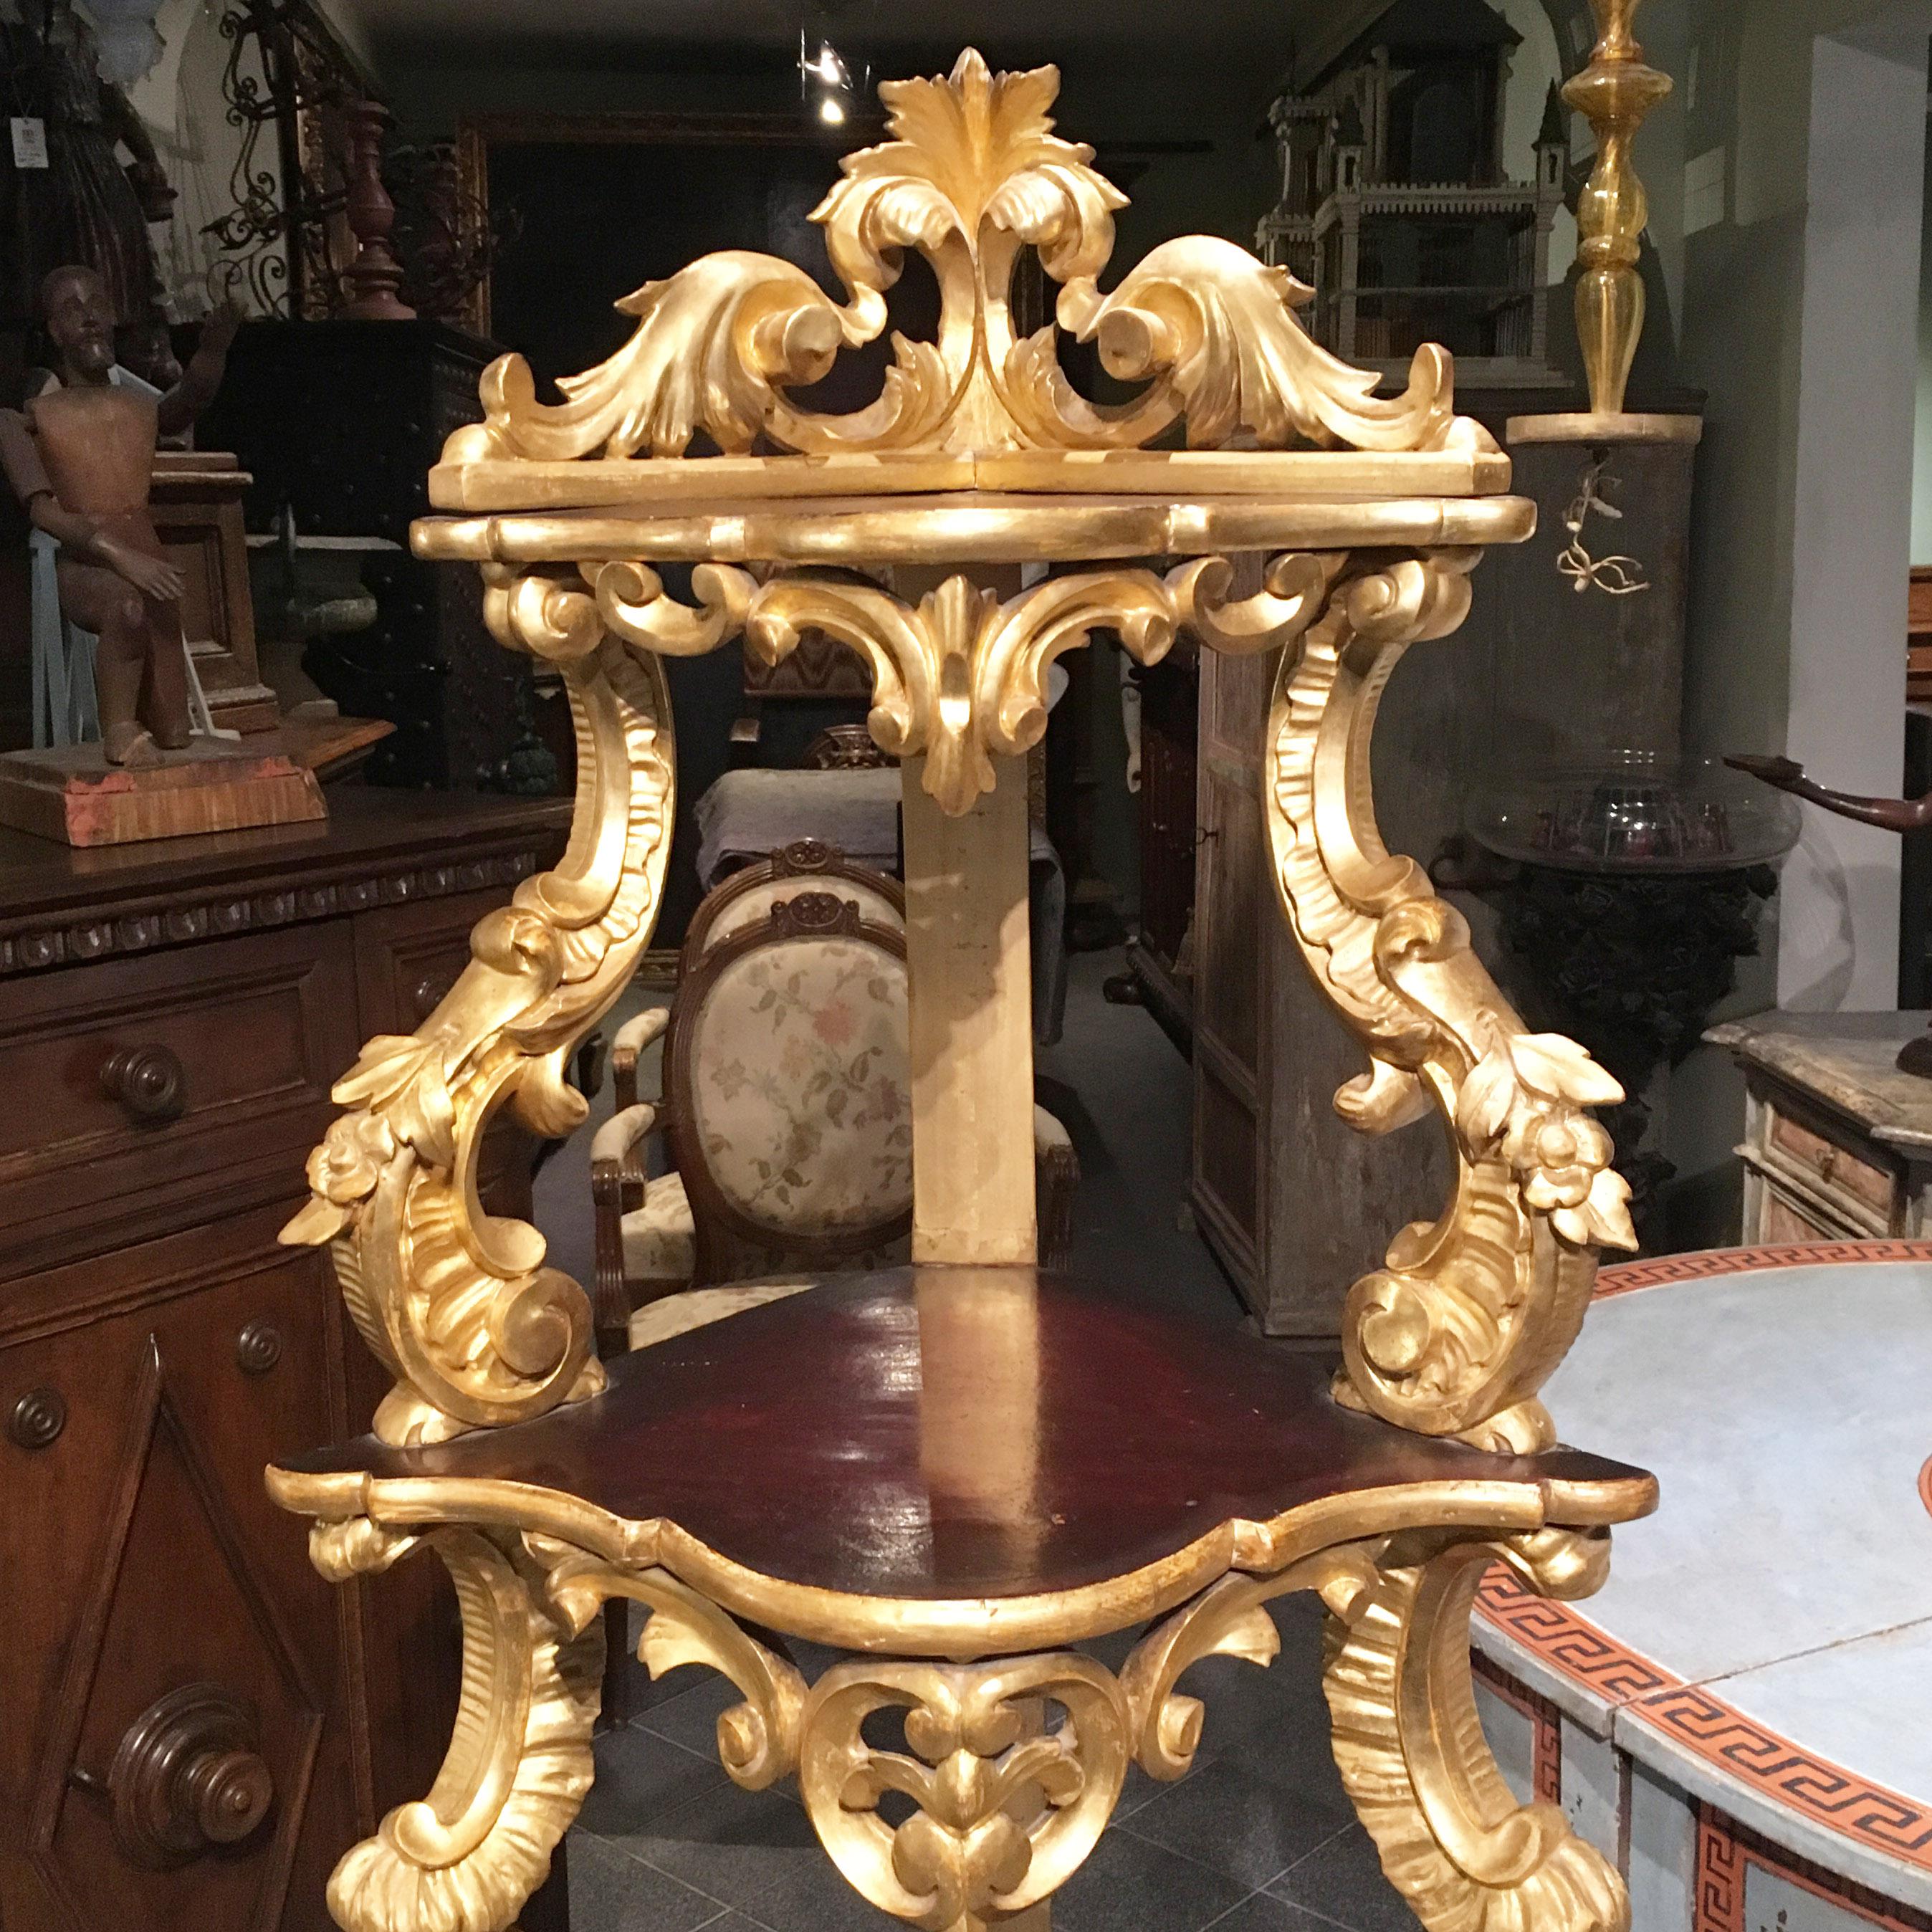 Charming Tuscan Louis Philippe corner shelf.
This elegant piece of furniture presents a hand carved decoration and a gold leaf gilding.
Tuscany, mid-19th century, circa 1840.